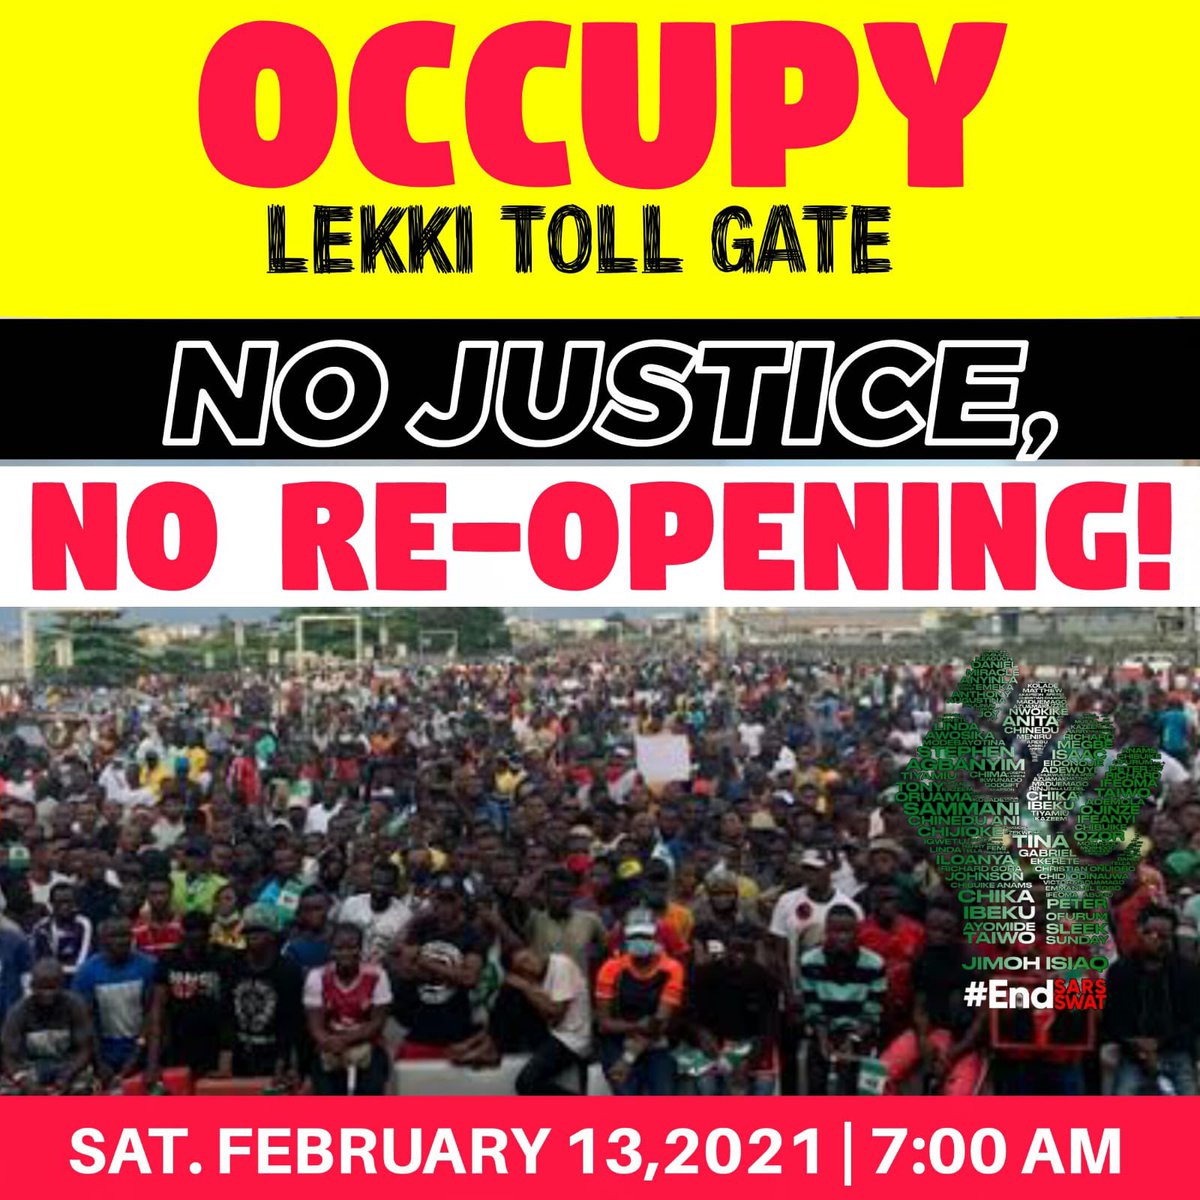 I just came online to see this #OccupyLekkiTollGate ahhhhhhhh!!
I am proud of my generation!
How can you kill our brothers and sisters and expect us to just move on without justice! 
We are the #COCONUTHEADGENERATION 
#endsars #EndPoliceBrutality
#EndBadGovernanceInNigeria